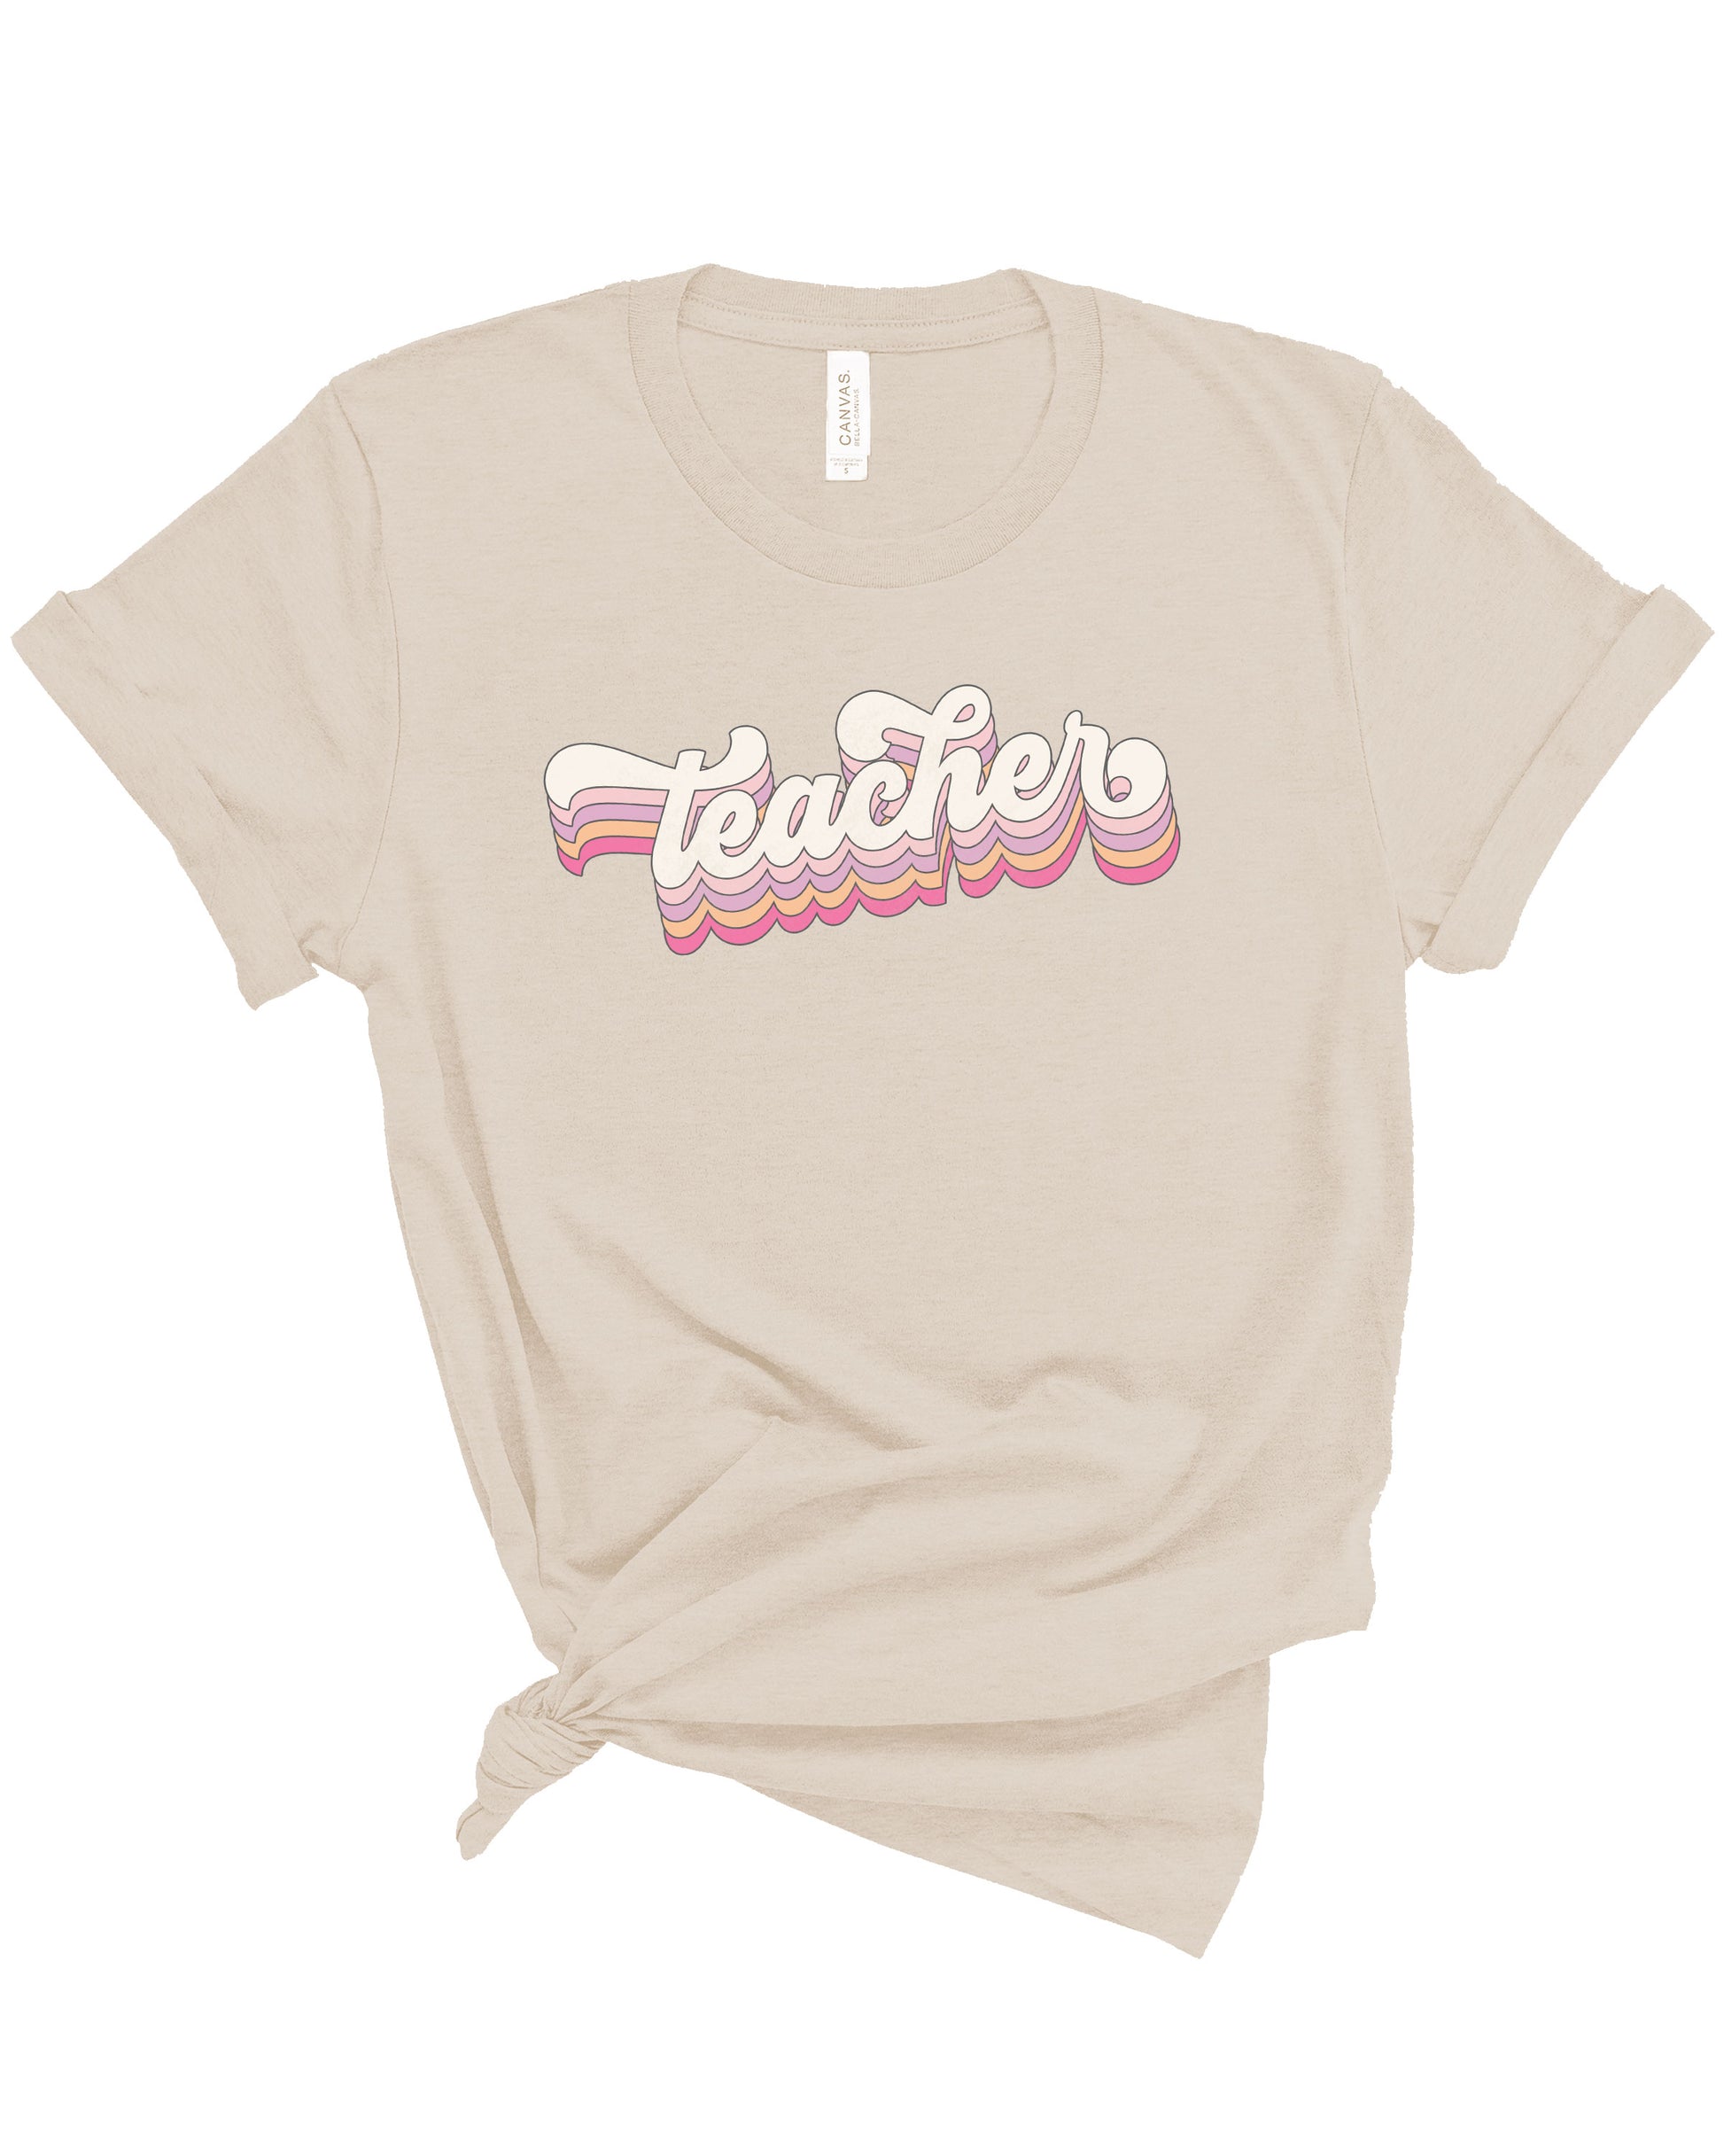 Groovy Teacher | Adult Tee-Sister Shirts-Sister Shirts, Cute & Custom Tees for Mama & Littles in Trussville, Alabama.